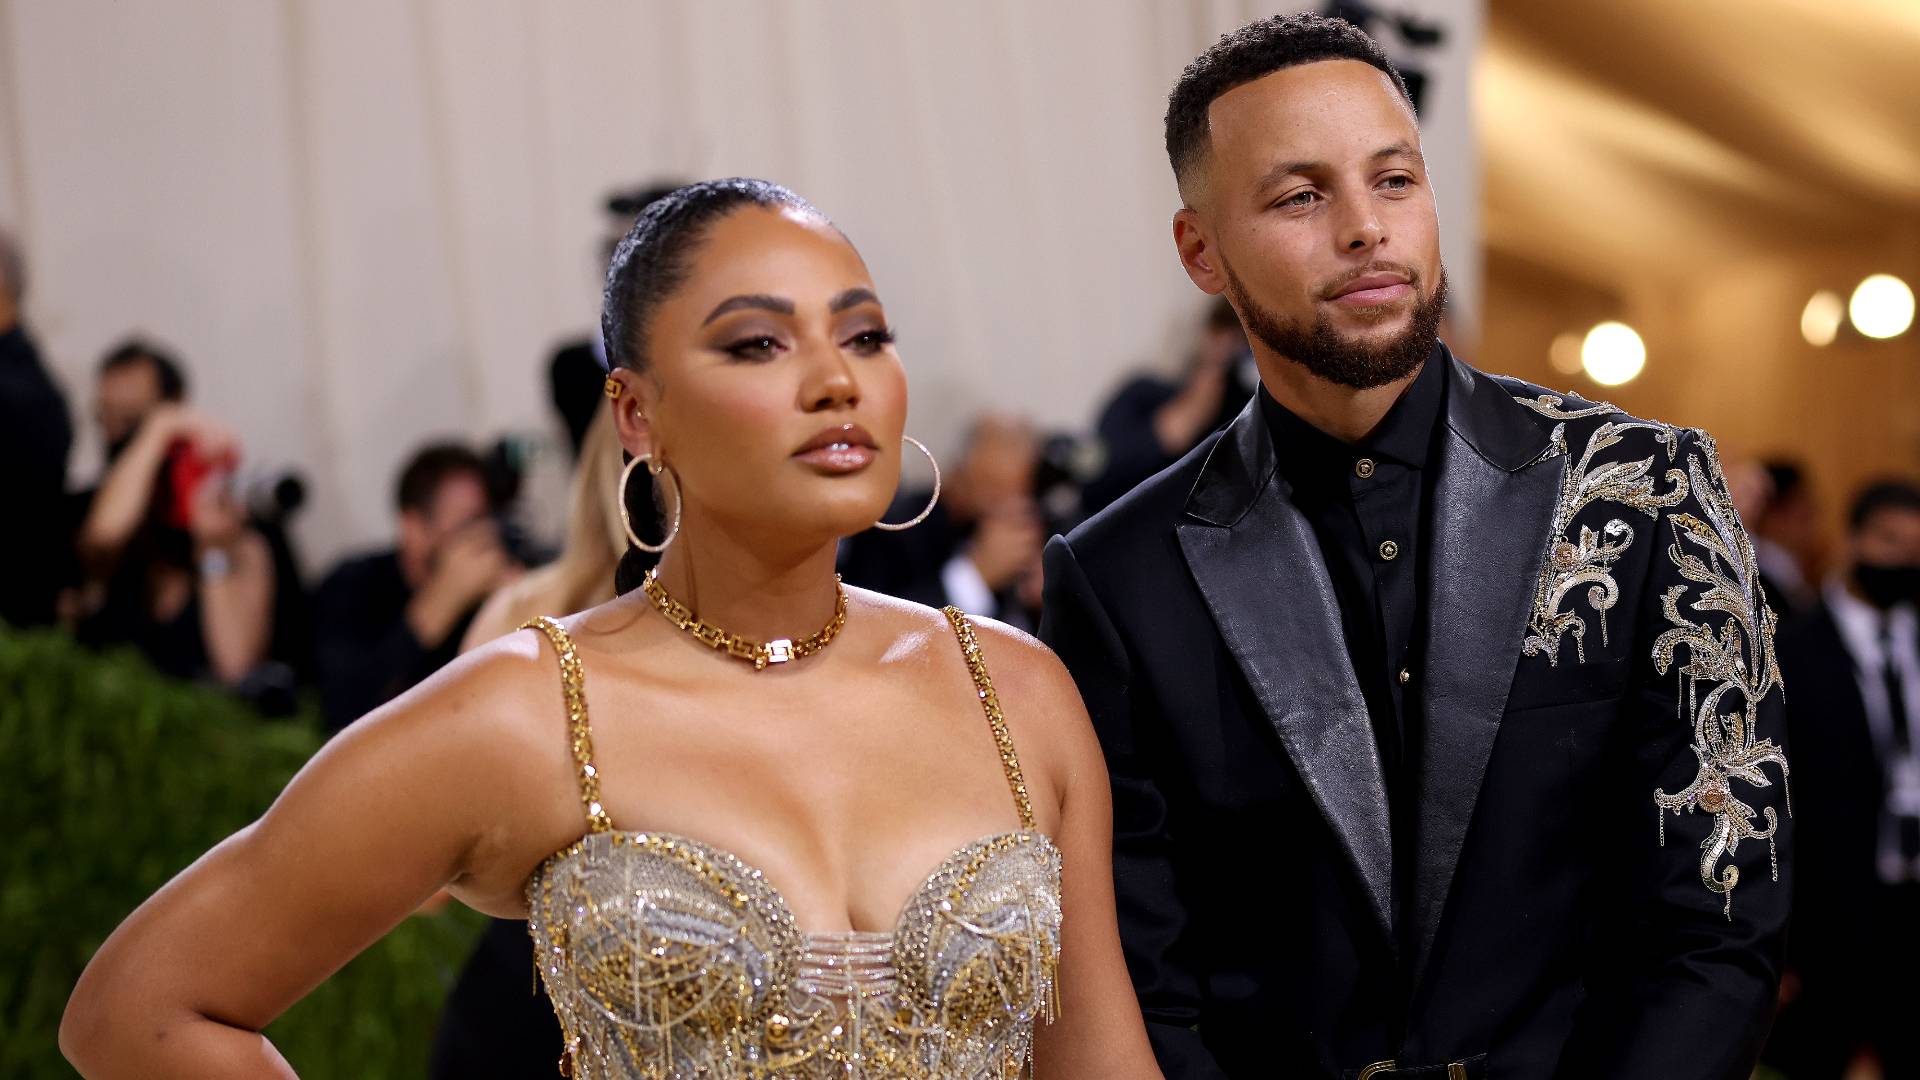 Steph Curry Opens Up About Having More Kids With Wife Ayesha Curry